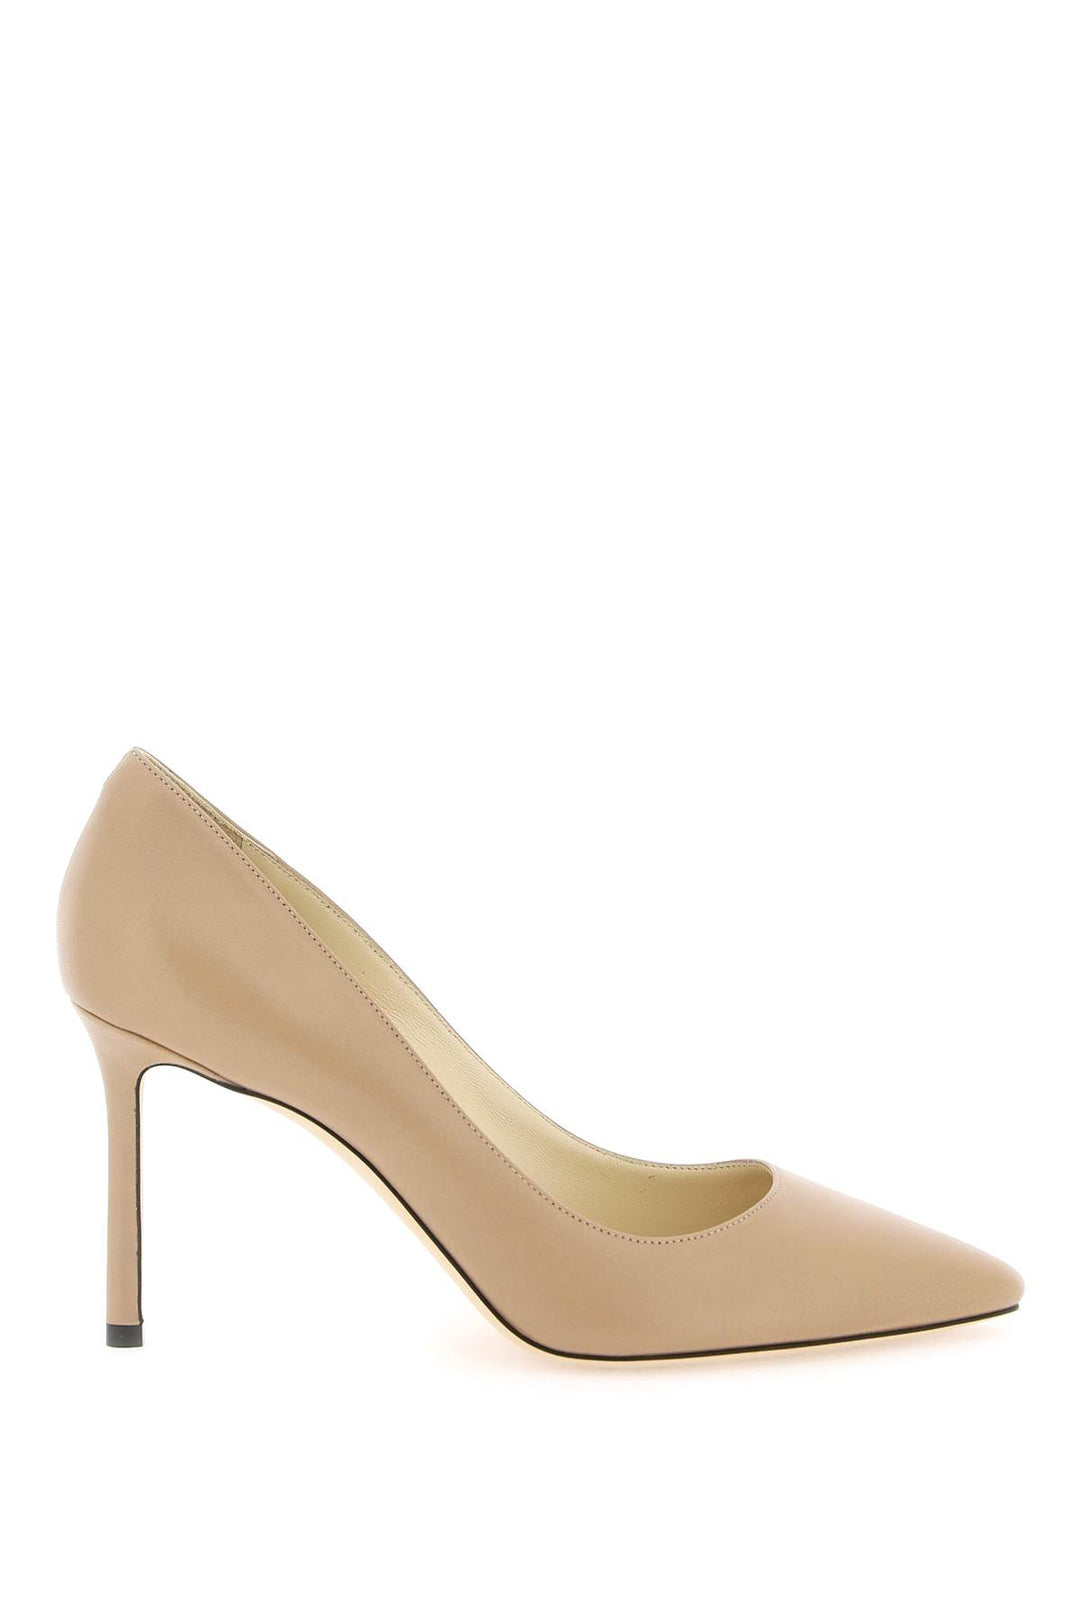 Décolleté Romy 85 In Nappa - Jimmy Choo - Donna